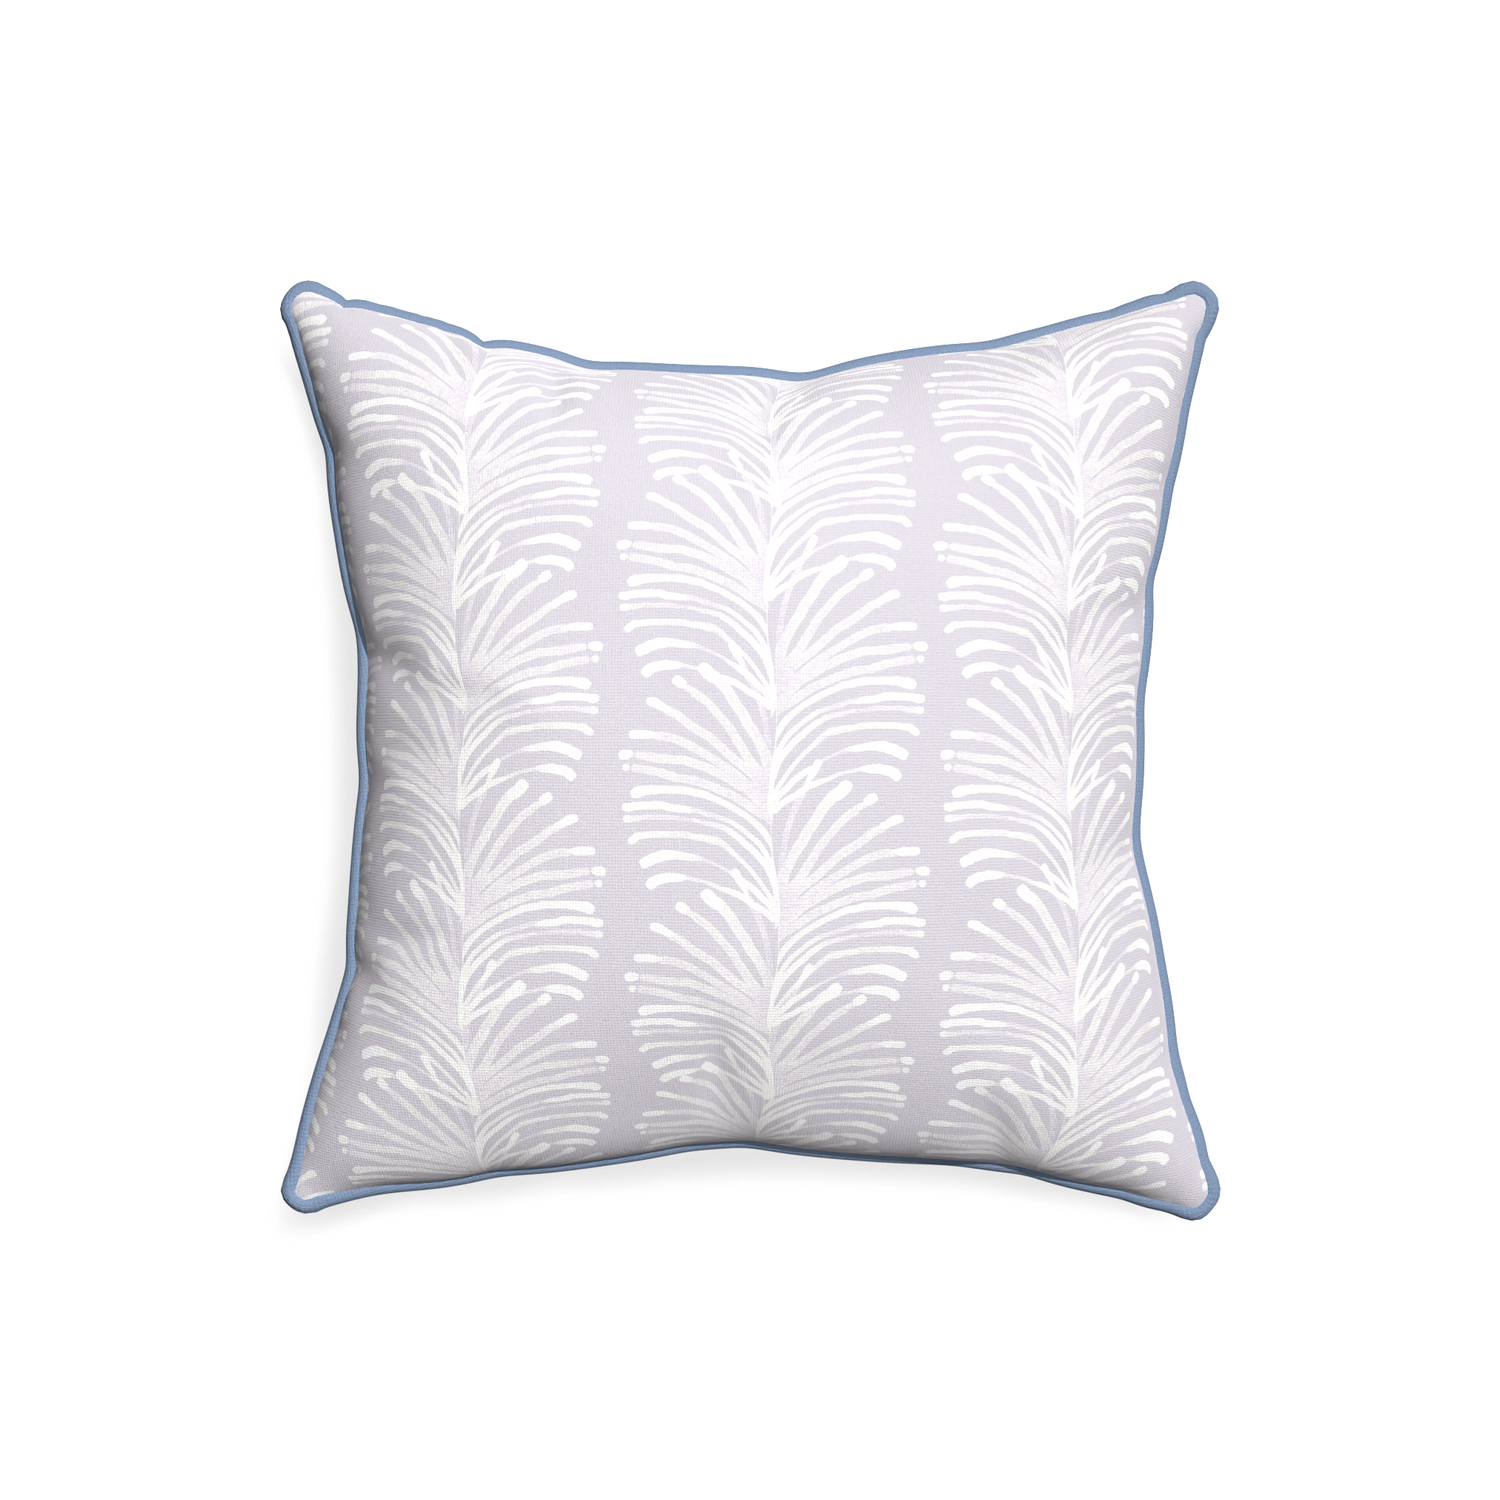 20-square emma lavender custom lavender botanical stripepillow with sky piping on white background